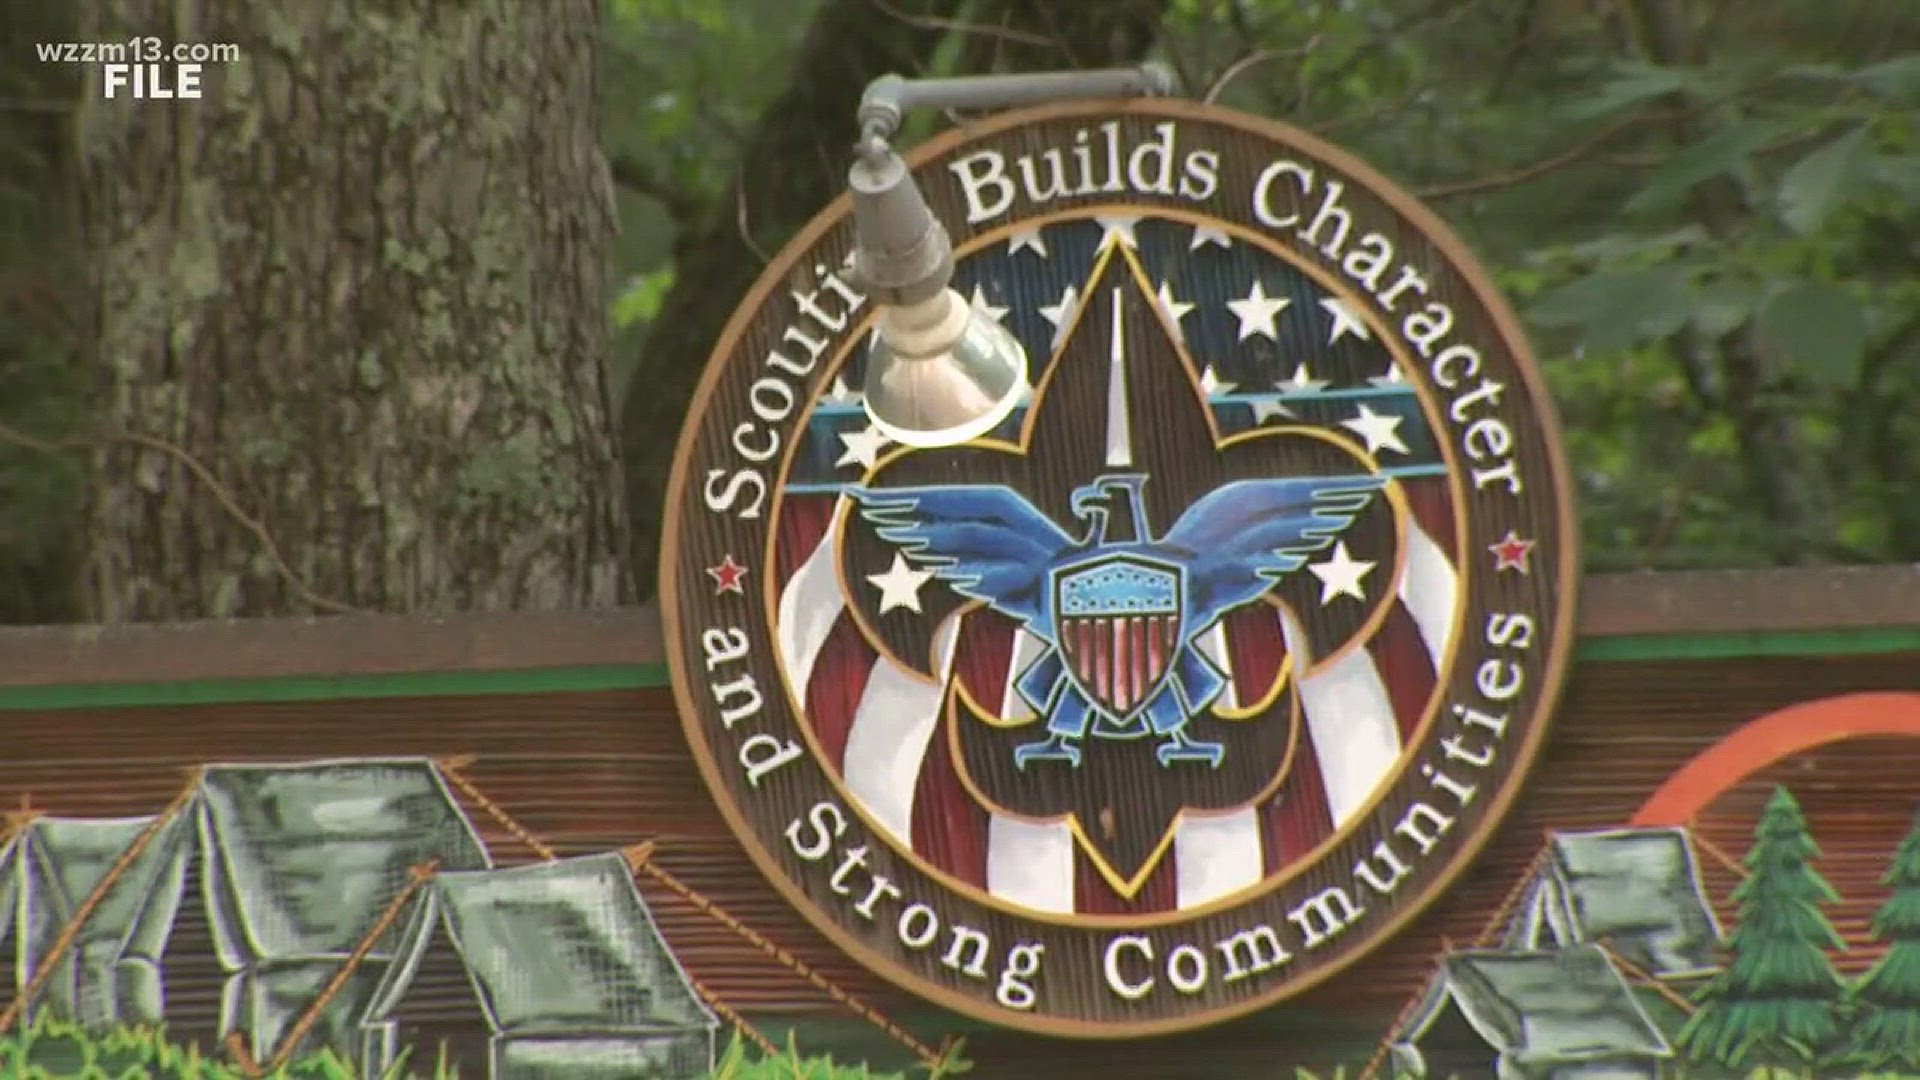 Food Vendor sues Boy Scout group for not paying bills